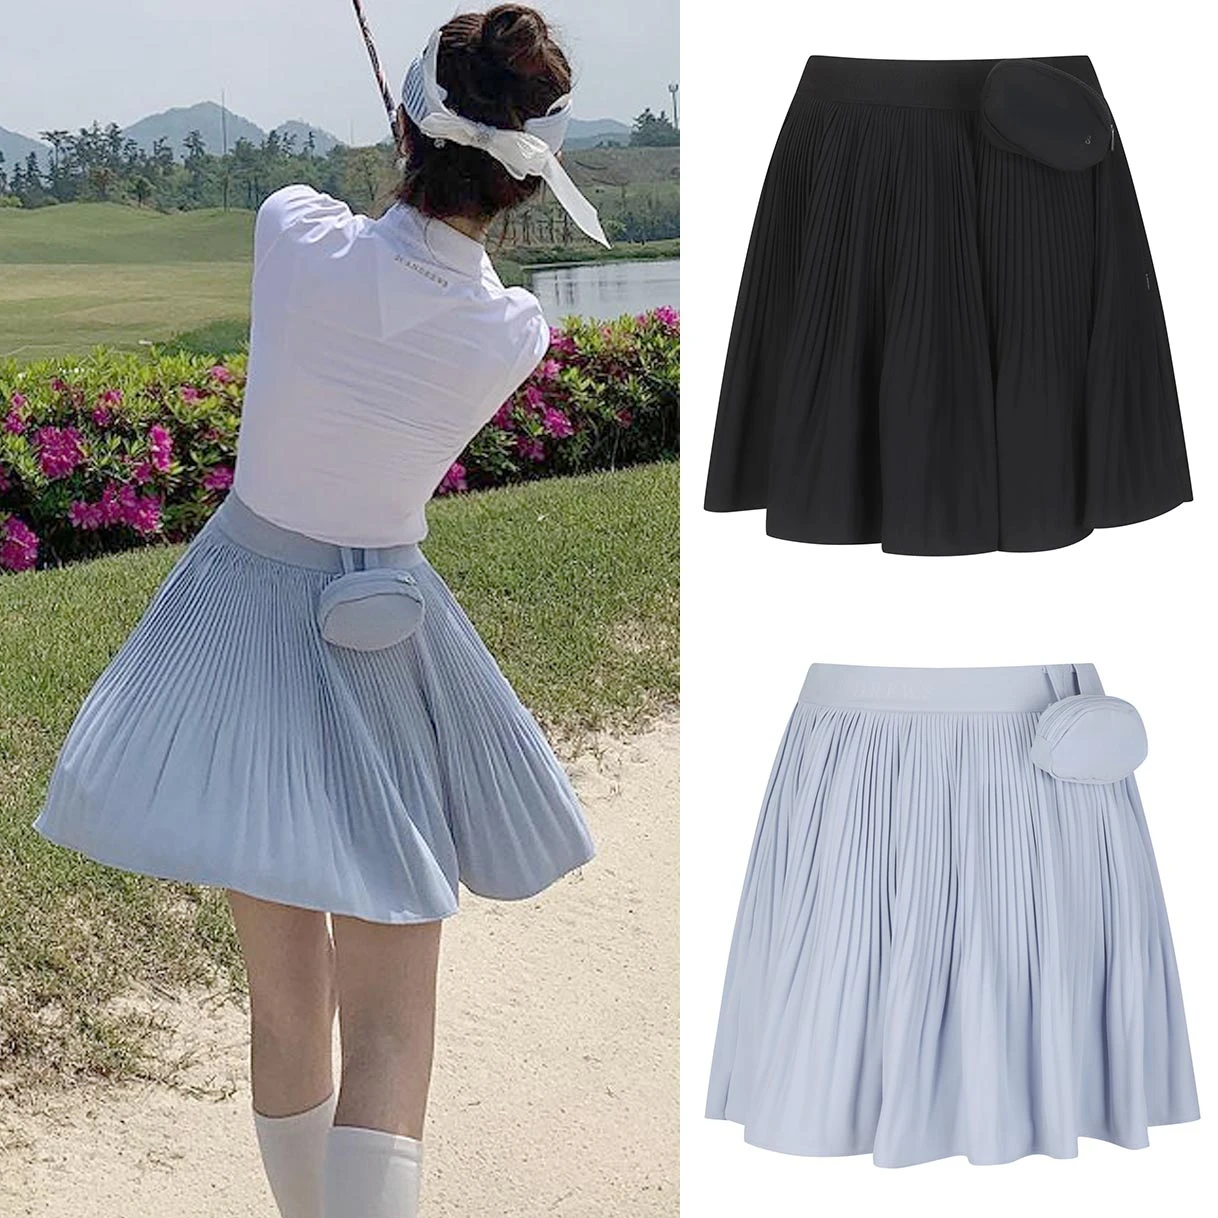 

23 New Golf Apparel Women's Short Skirt Slim Fit and Slim Golf Delivery Bag Wrinkle Free Pleated Skirt